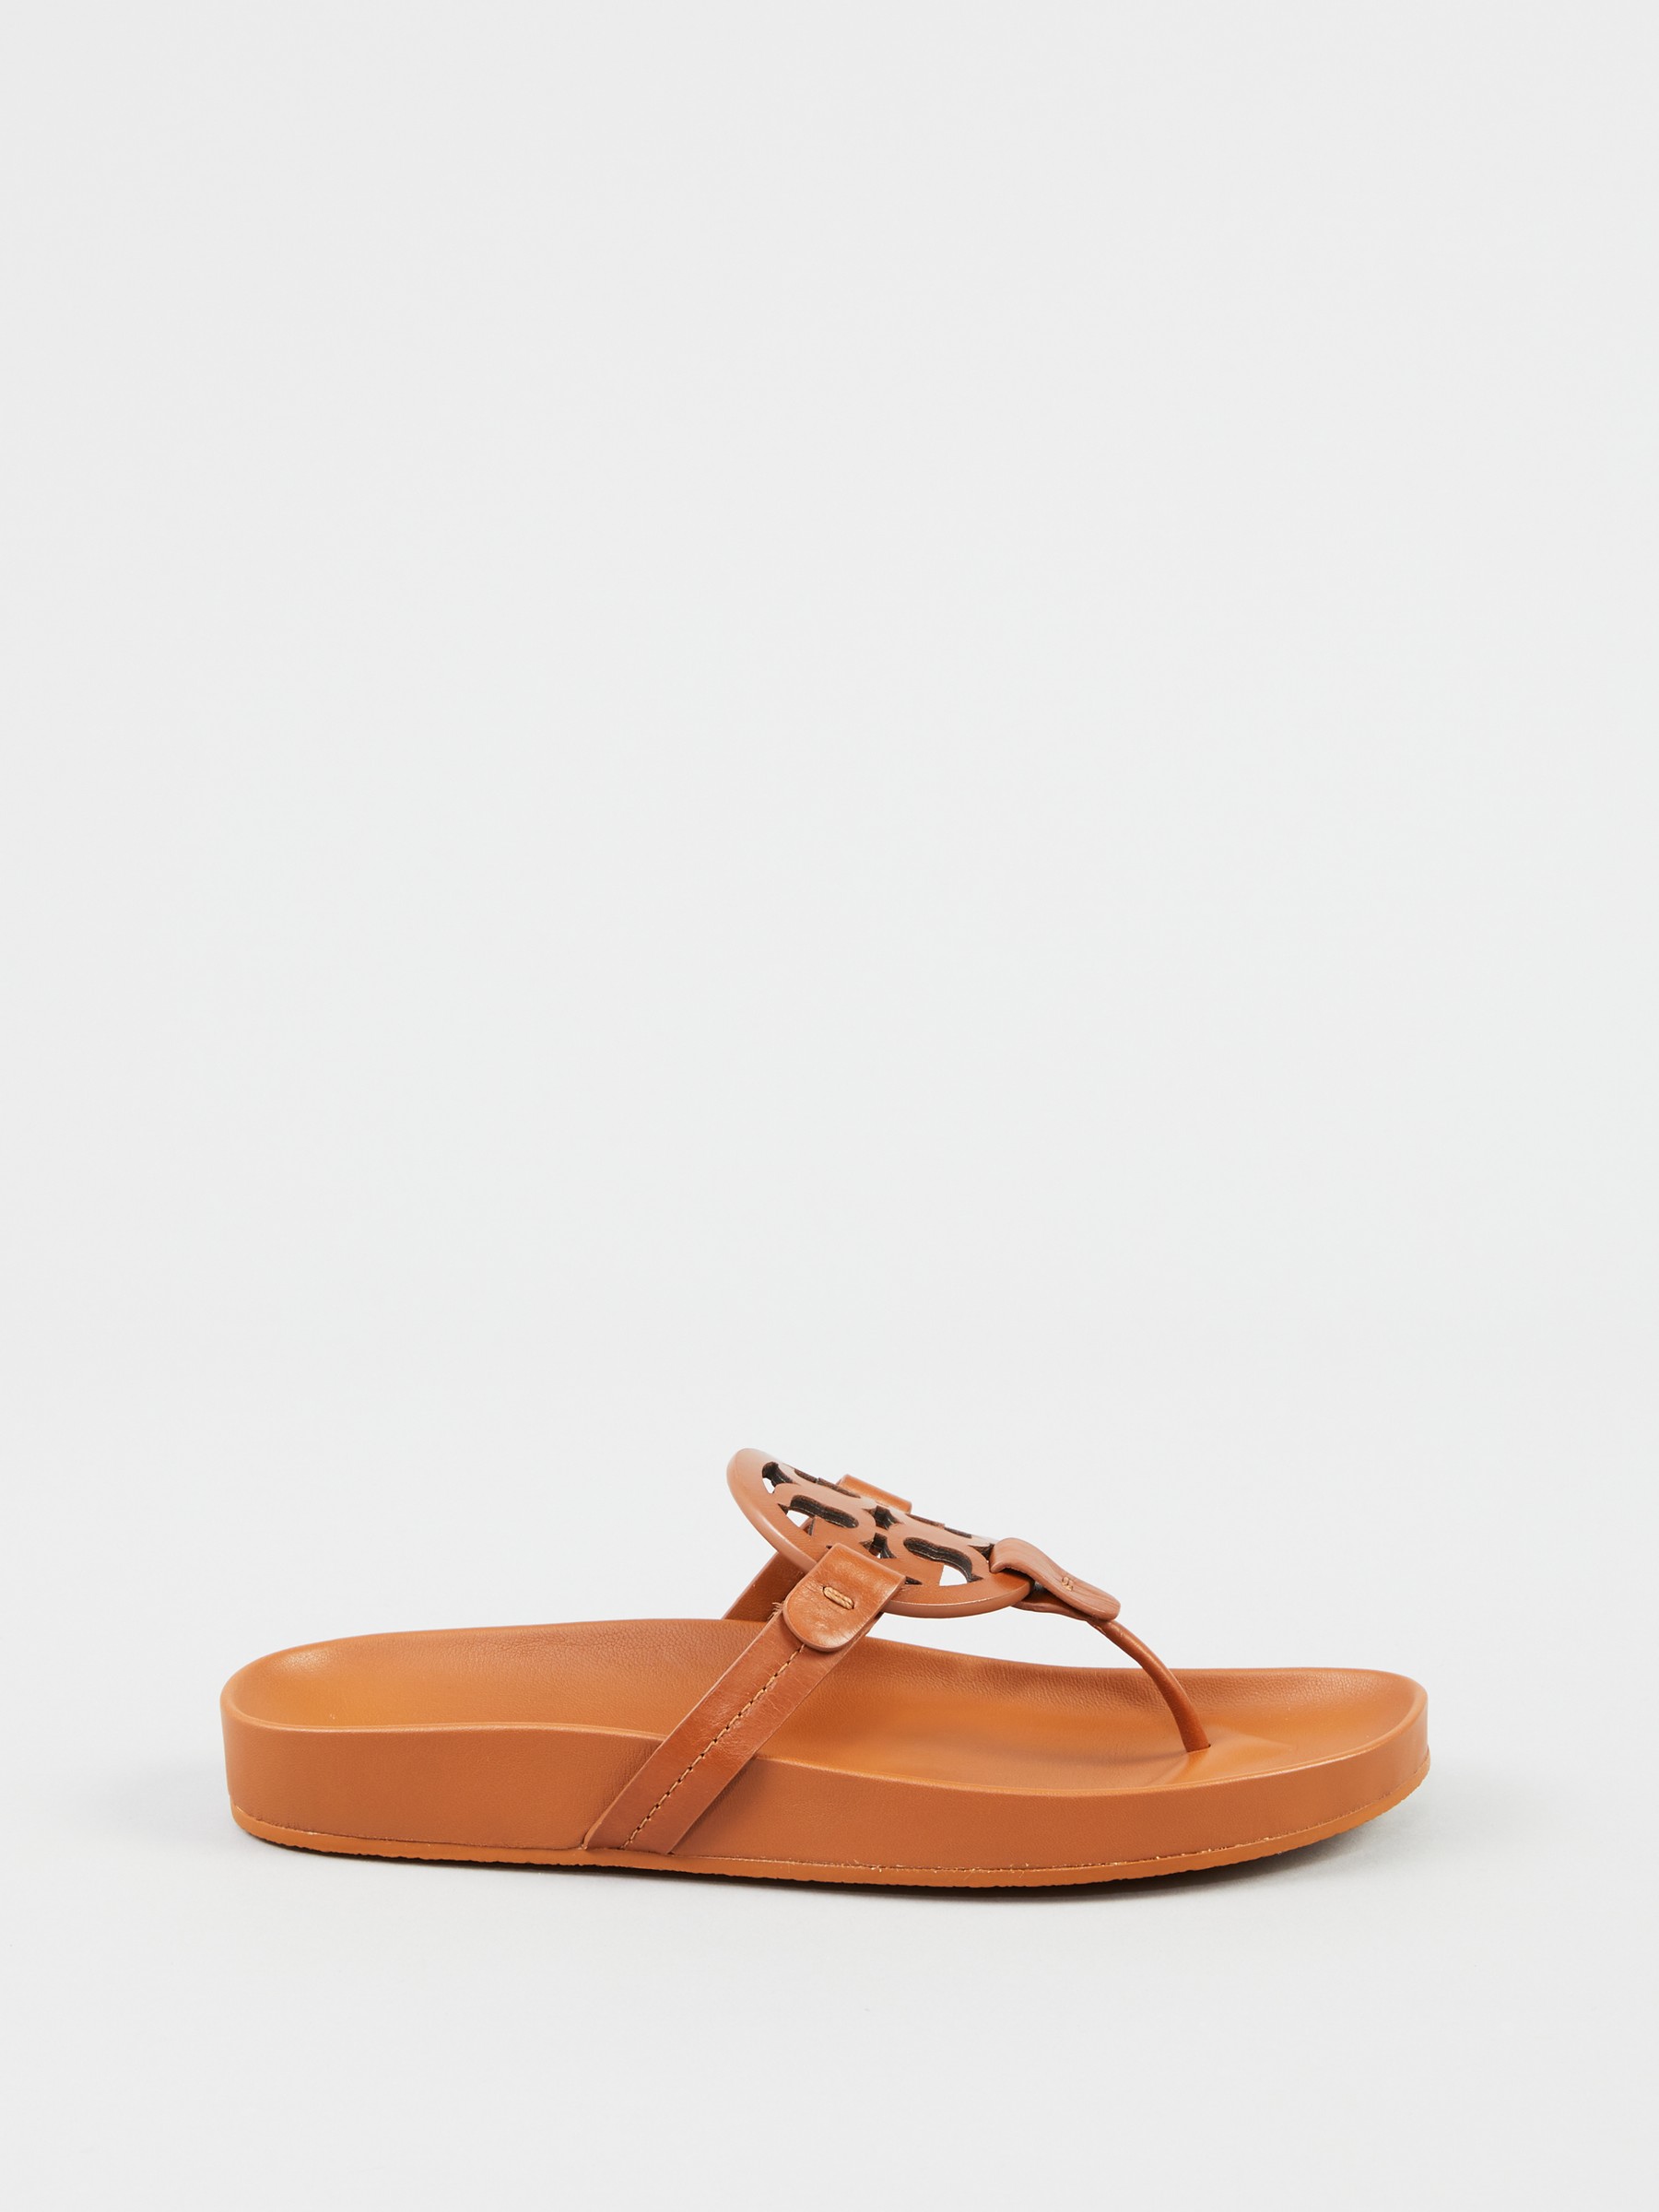 Tory Burch Leather Sandals 'Miller Cloud' Brown | Heeled Sandals